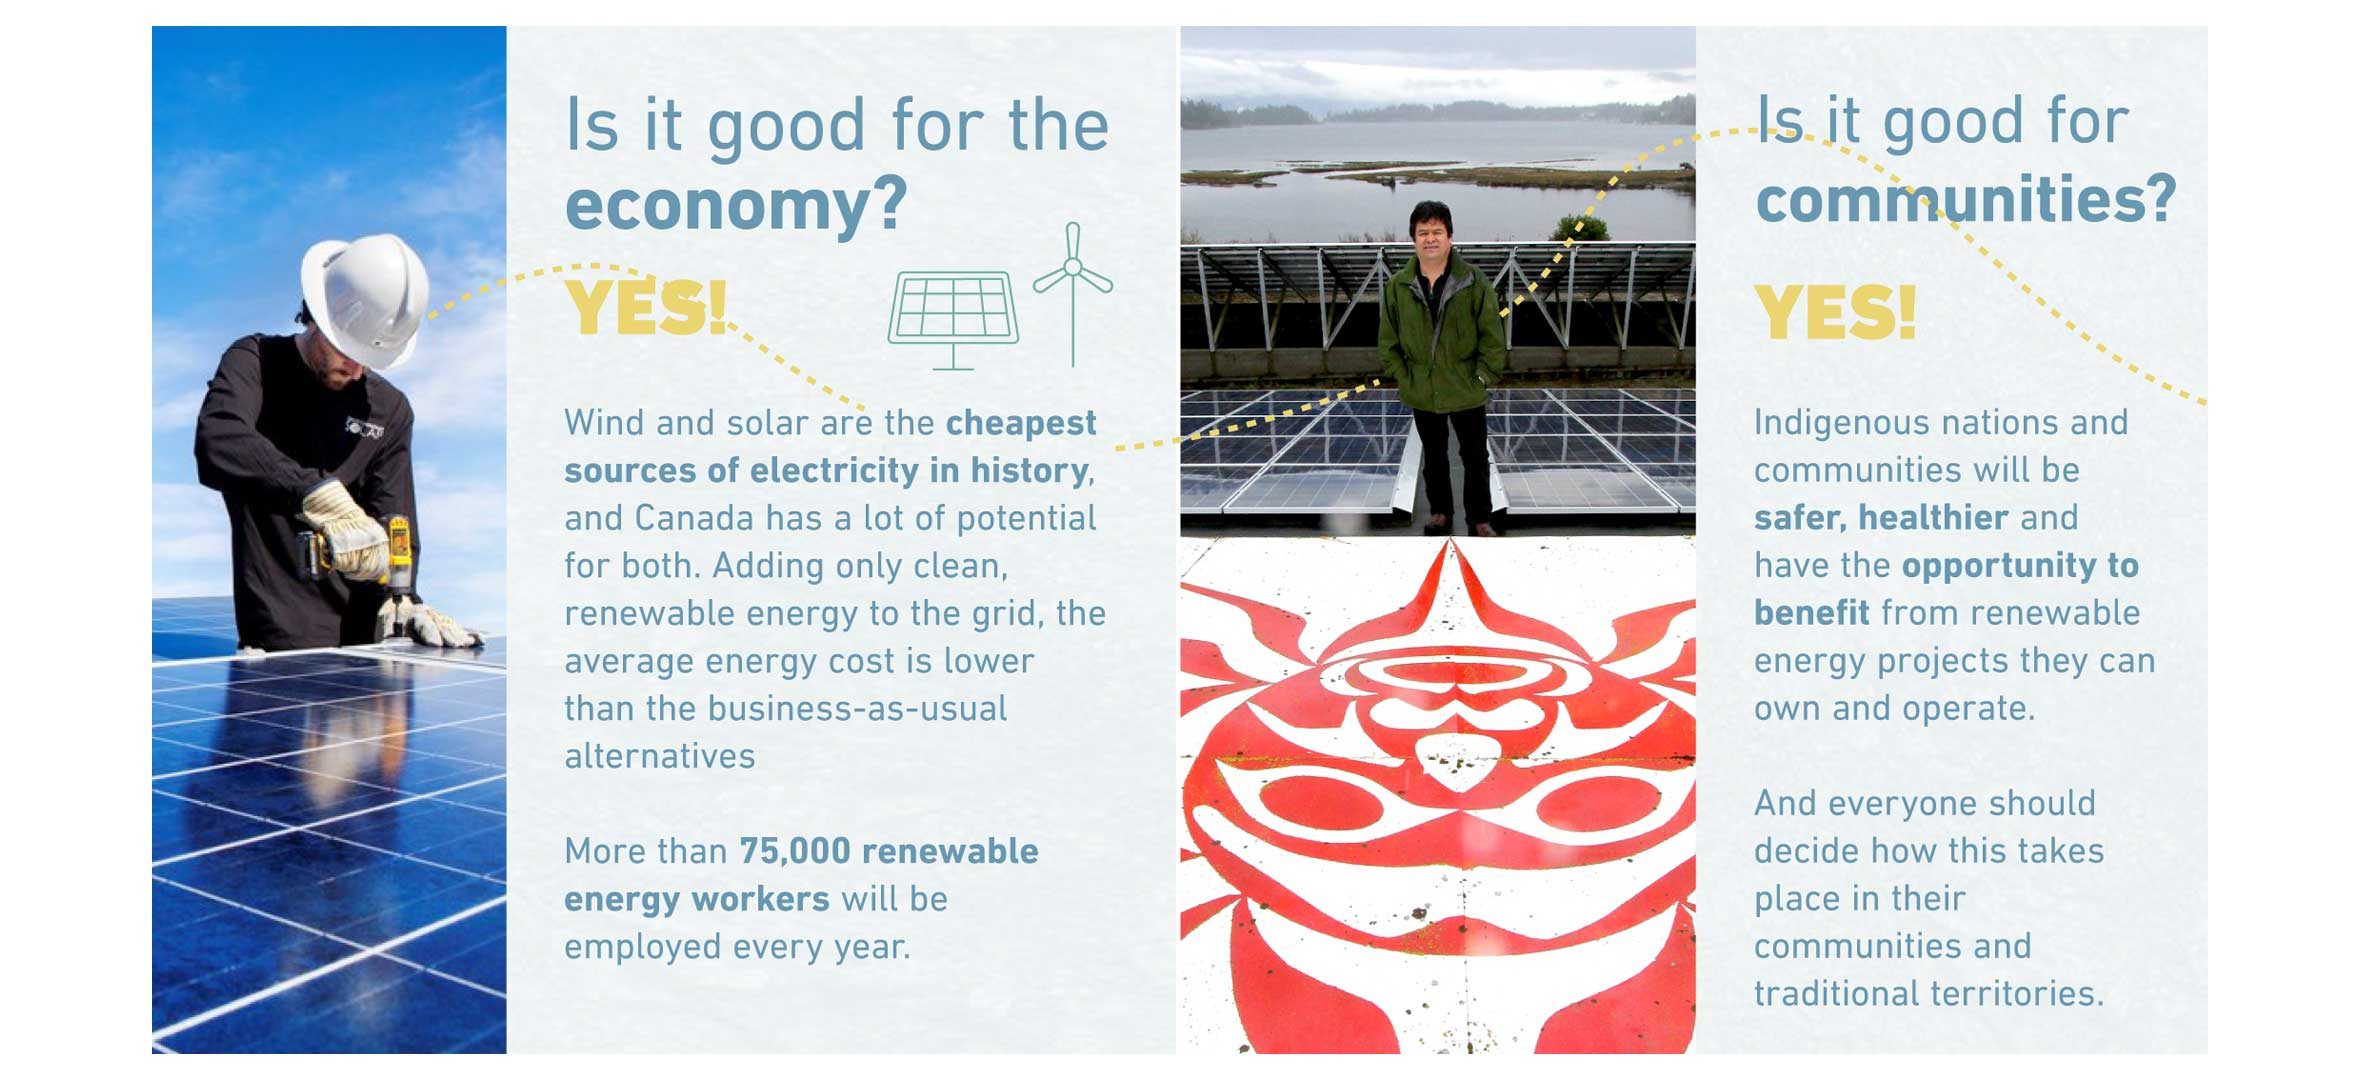 Images of solar panels in an explainer that clean renewable electricity is good for the economy and communities